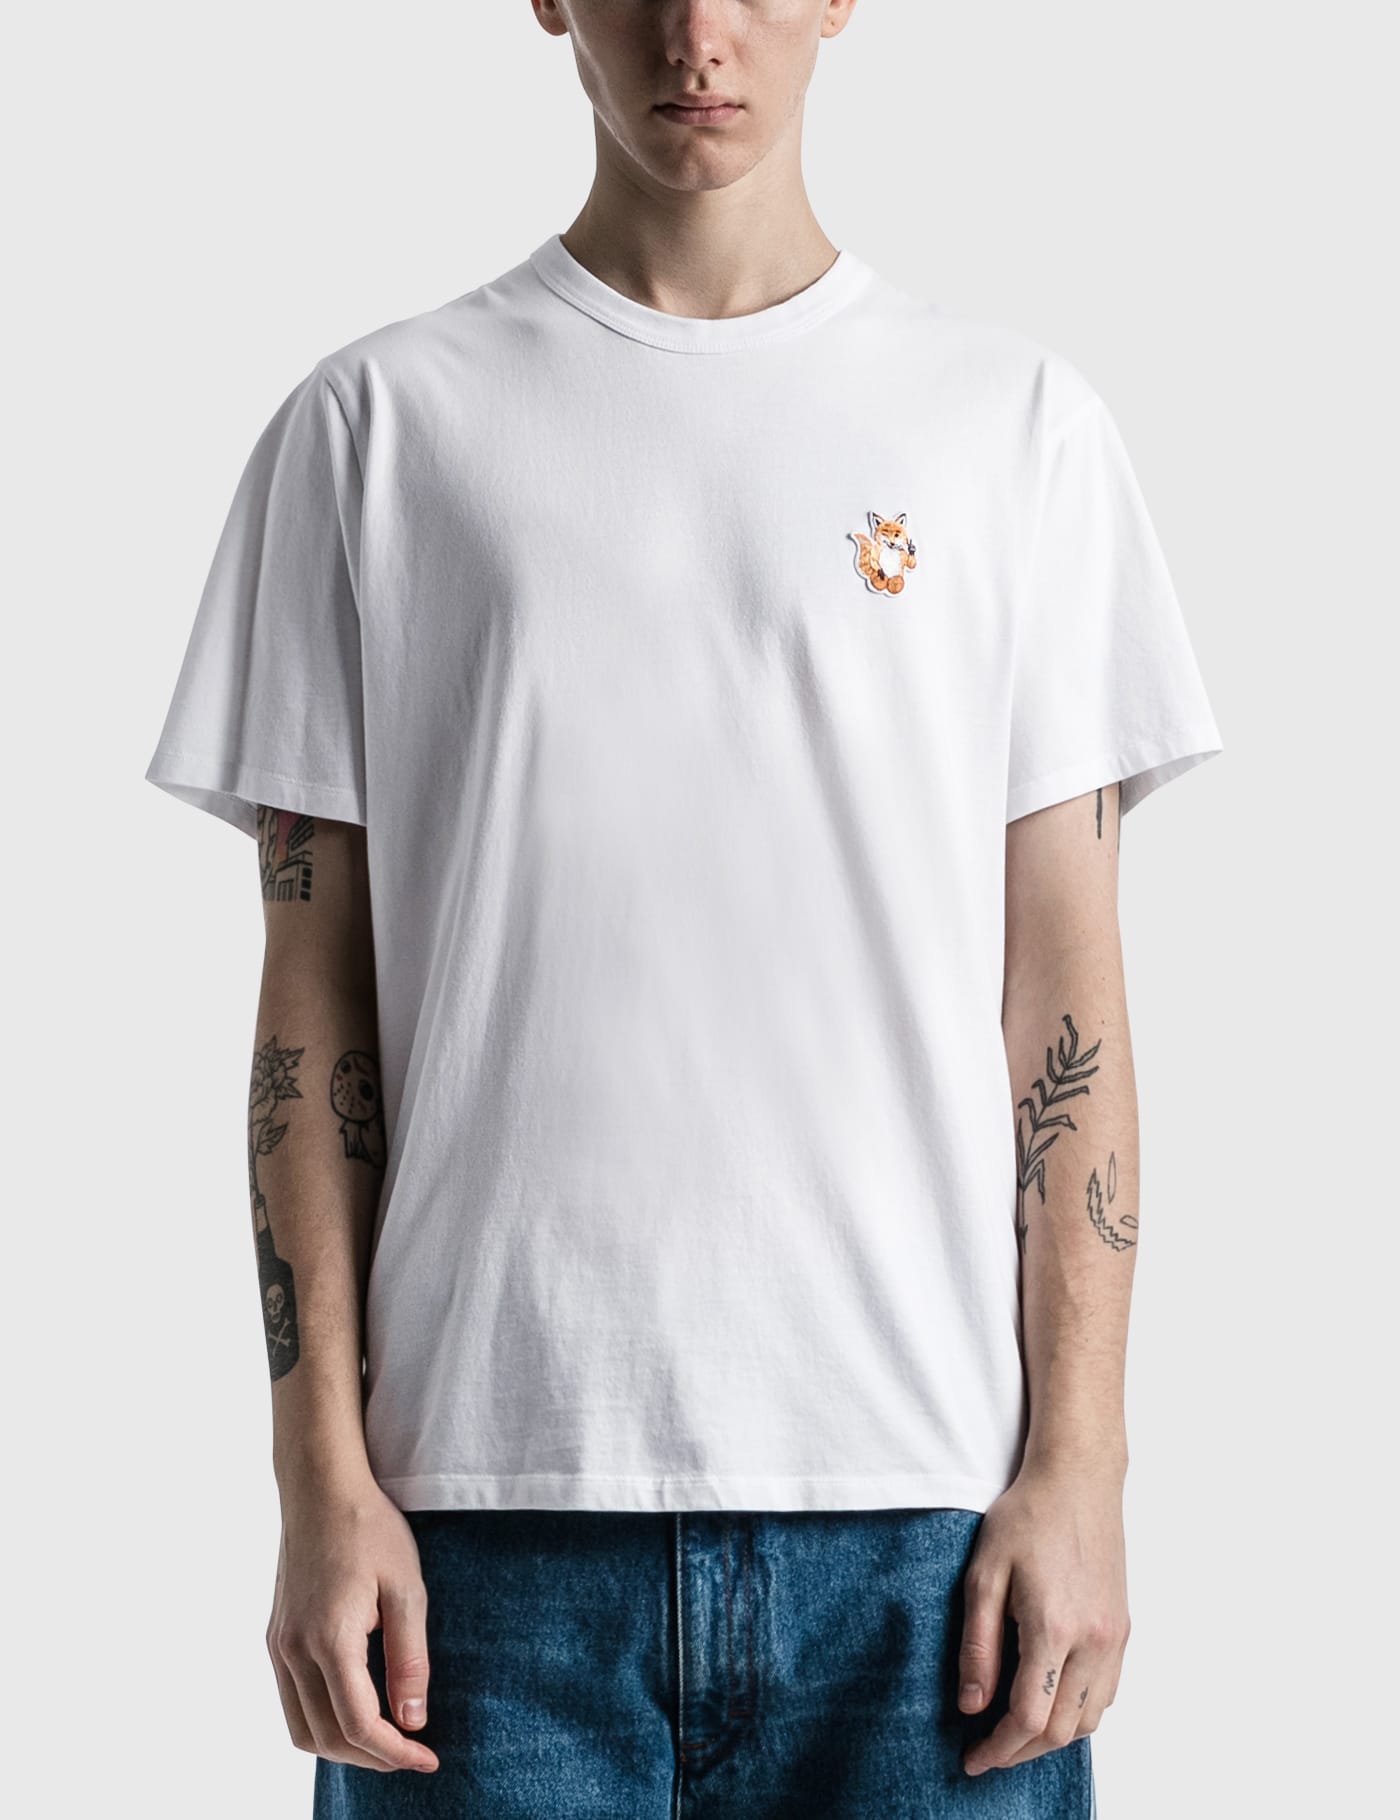 Maison Kitsune - All Right Fox Patch Classic T-shirt | HBX - Globally  Curated Fashion and Lifestyle by Hypebeast